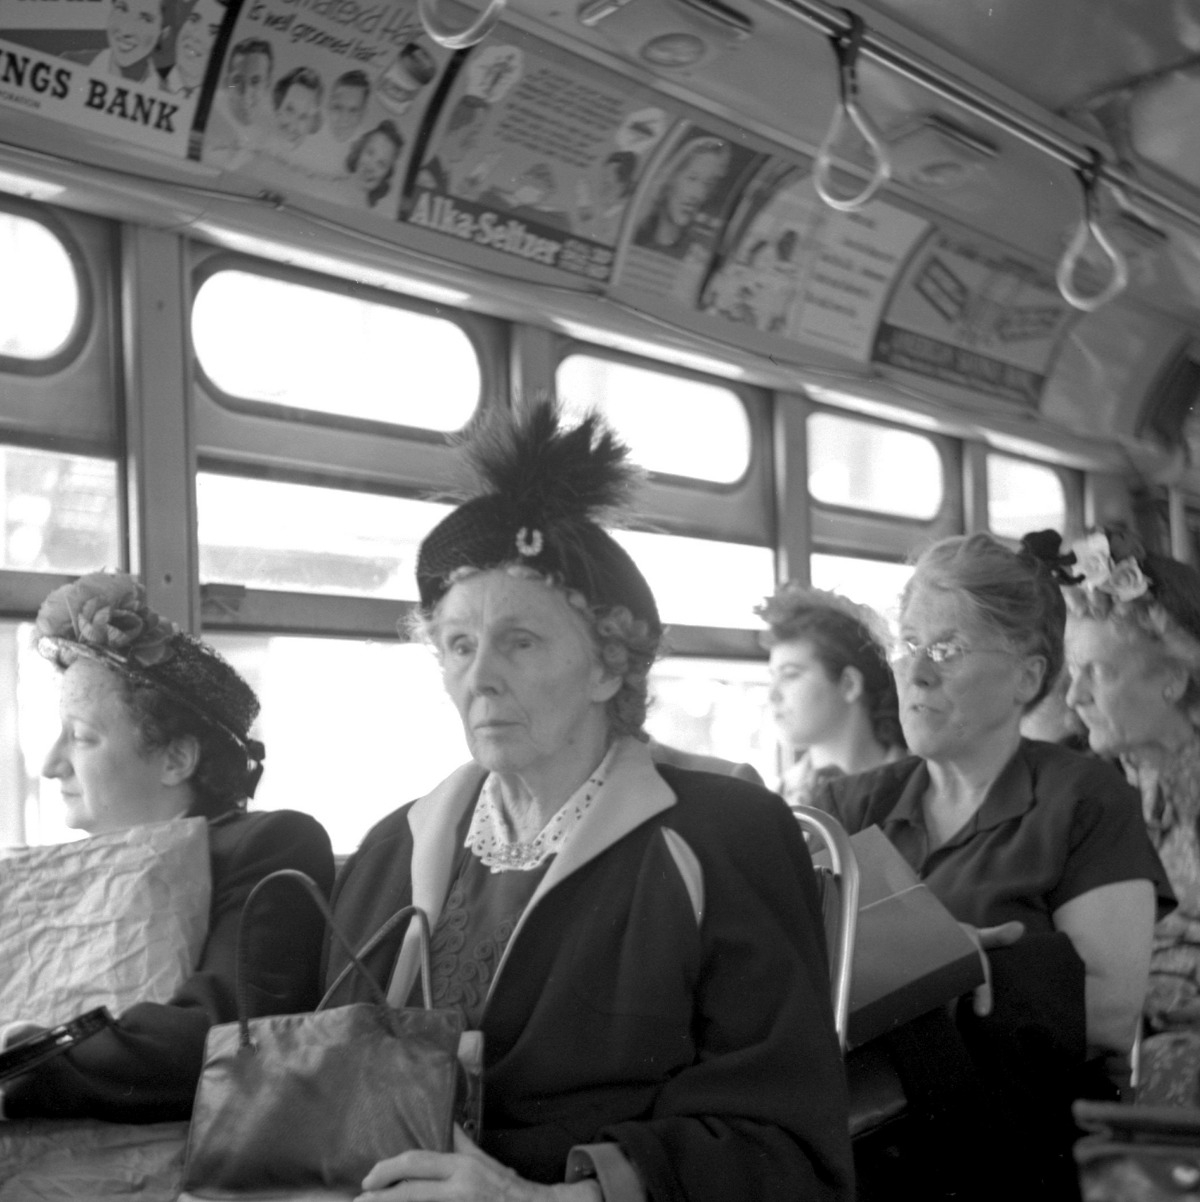 Woman on the bus, New York, c. 1946-1950